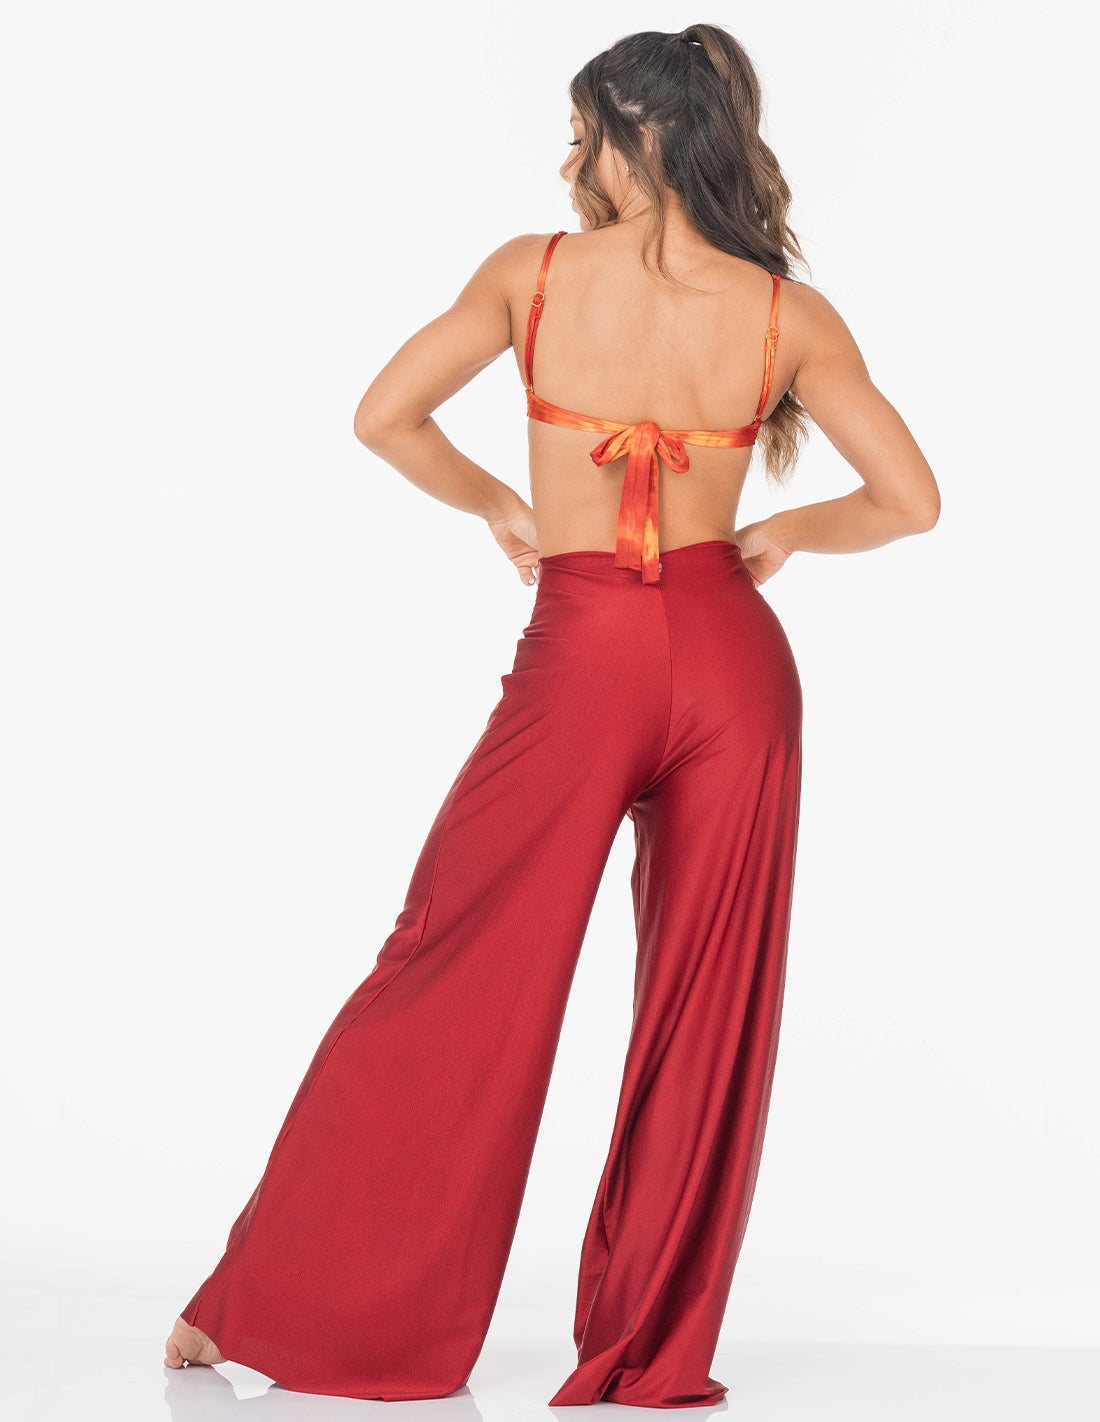 Candelaria Pants Wine. Hand-Dyed Pants With Hand Woven Macramé In Wine. Entreaguas